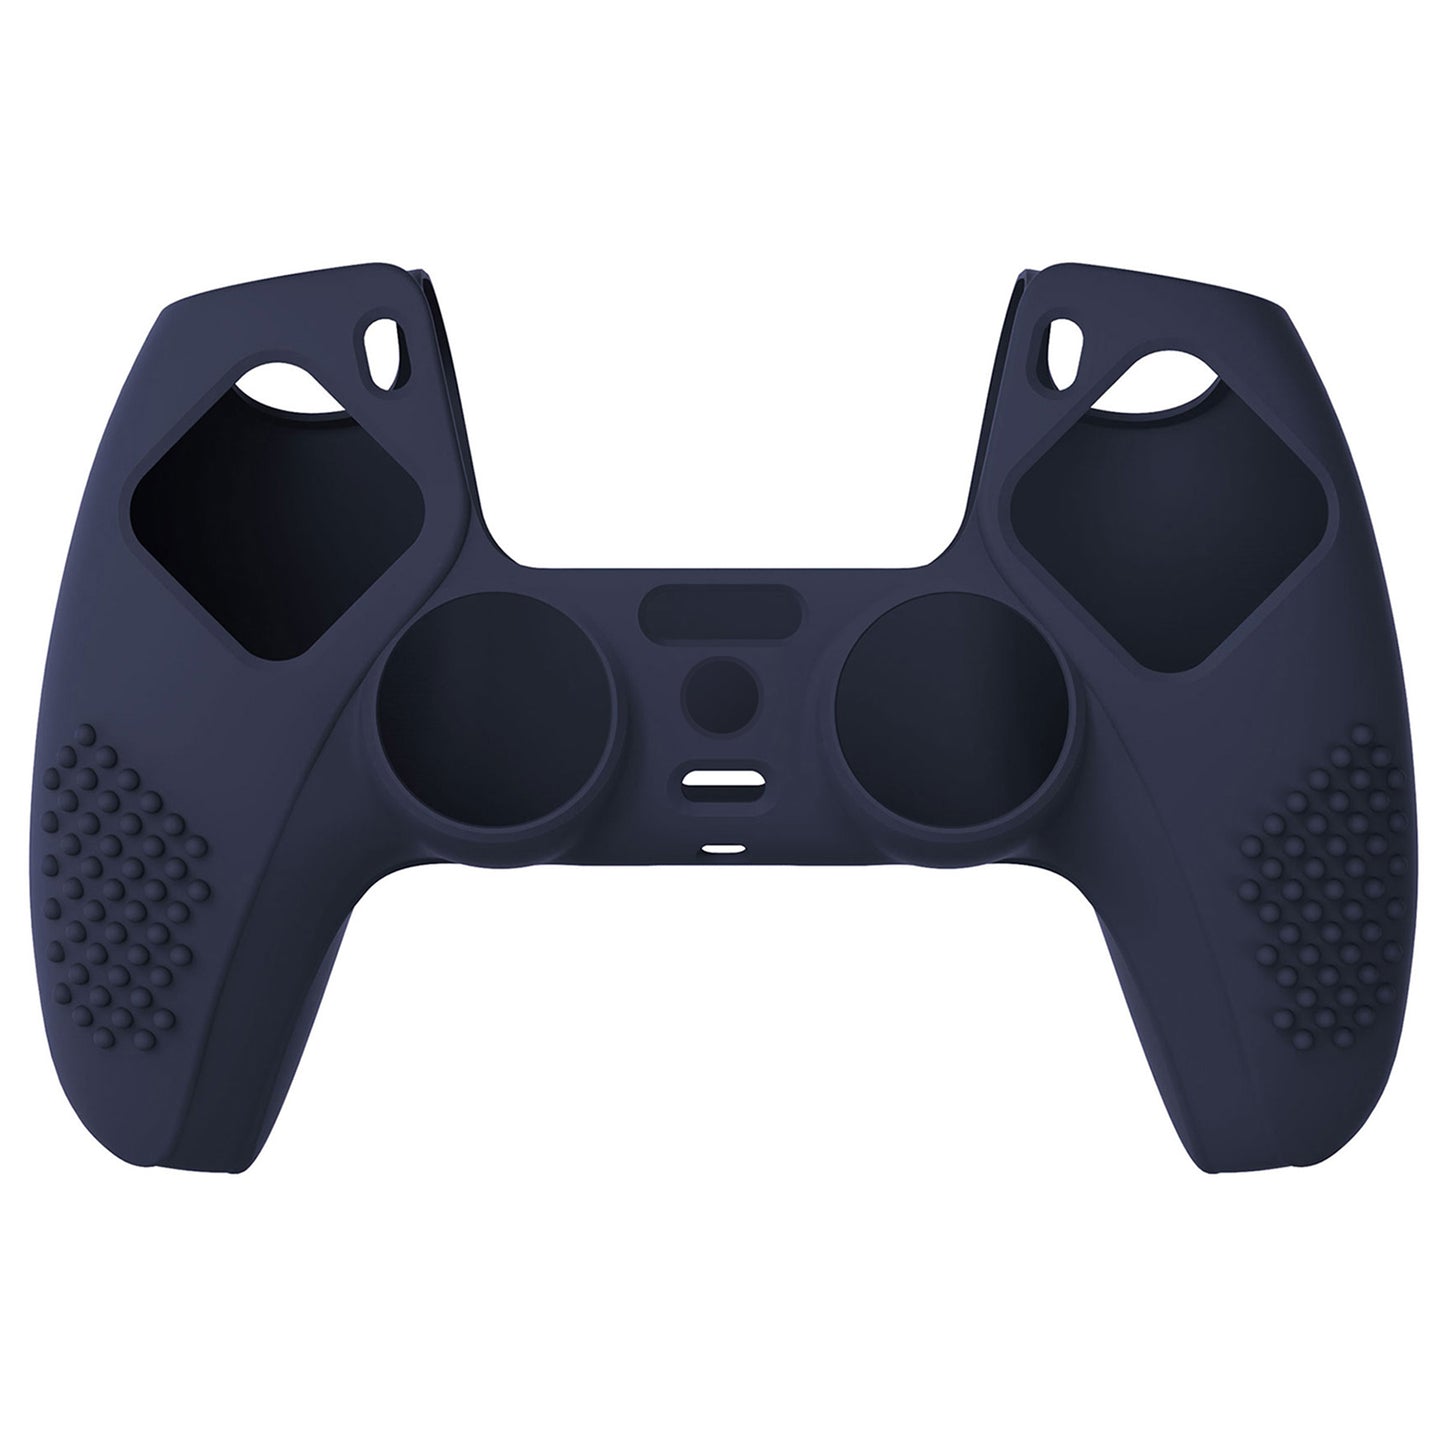 PlayVital 3D Studded Edition Anti-Slip Silicone Cover Skin with Thumb Grip Caps for PS5 Wireless Controller - Midnight Blue - TDPF003 PlayVital